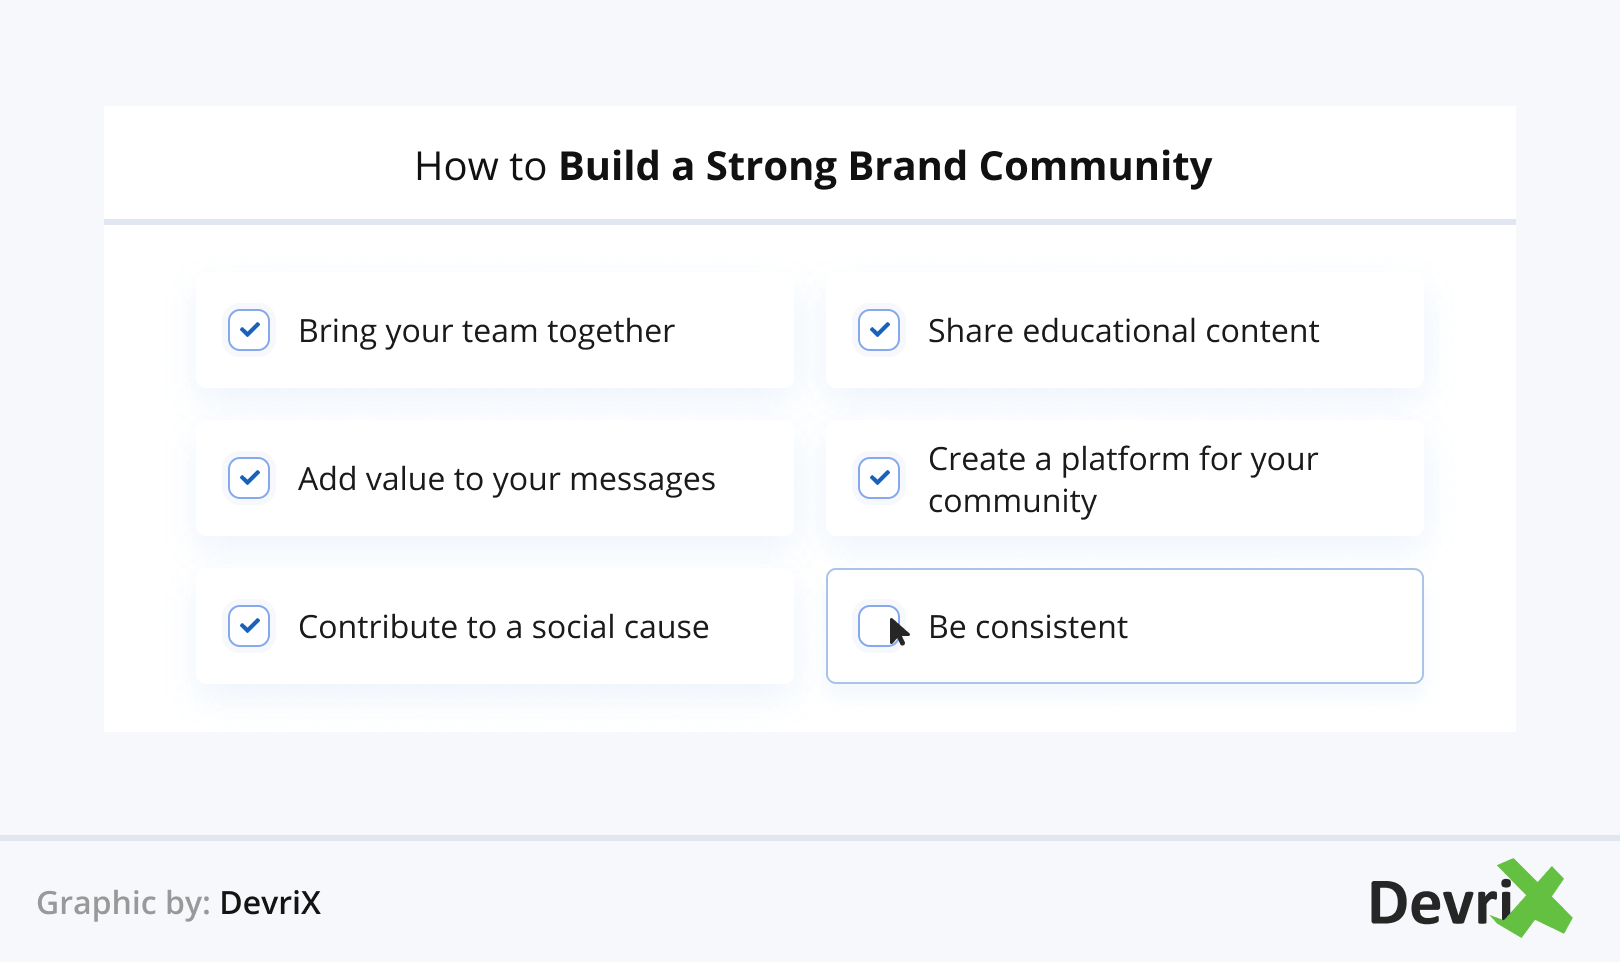 How to Build a Strong Brand Community